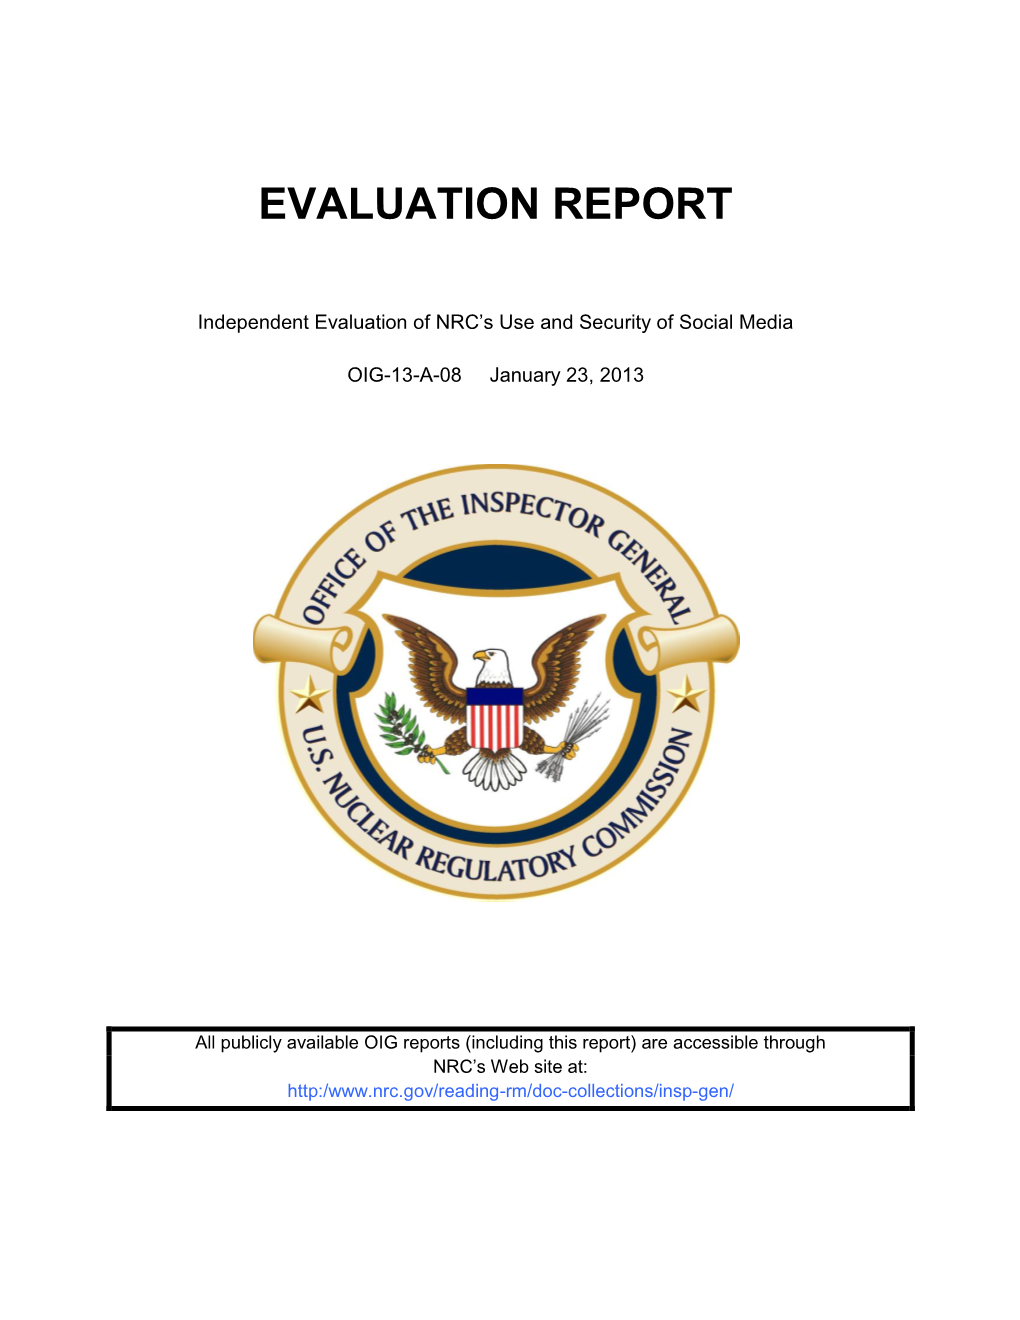 OIG 13-A-08 Independent Evaluation of NRC's Use and Security of Social